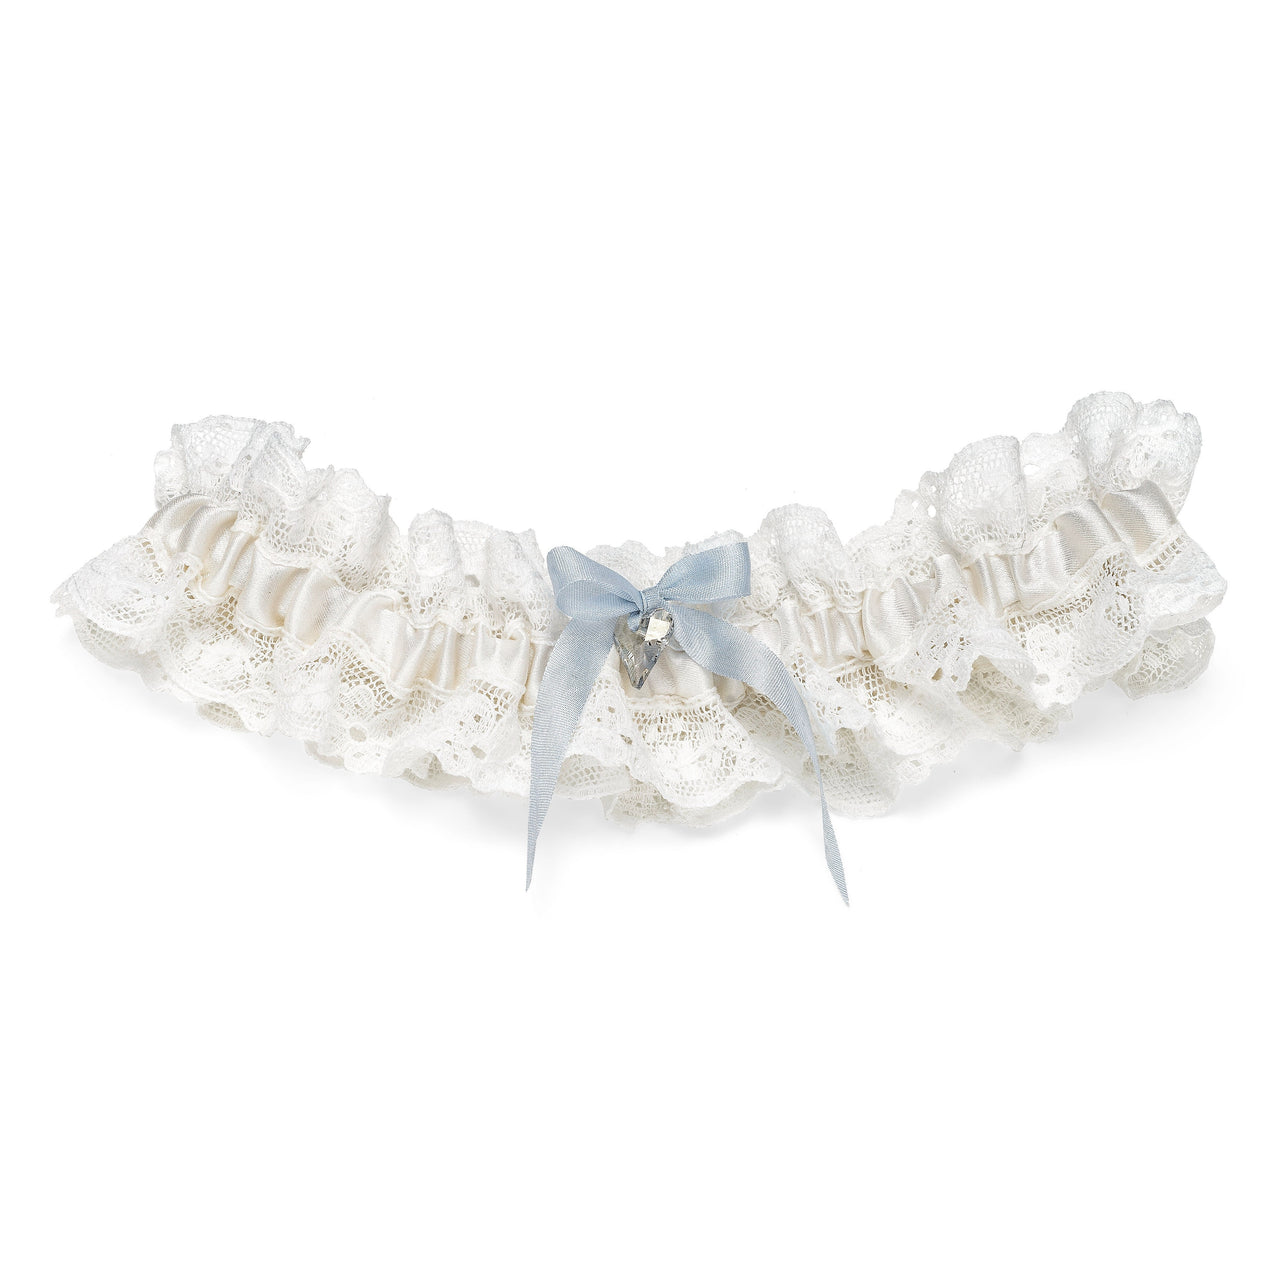 Lace Wedding garter, ivory silk and Nottingham lace, with a blue silk ribbon bow and vintage style Swarovski crystal heart